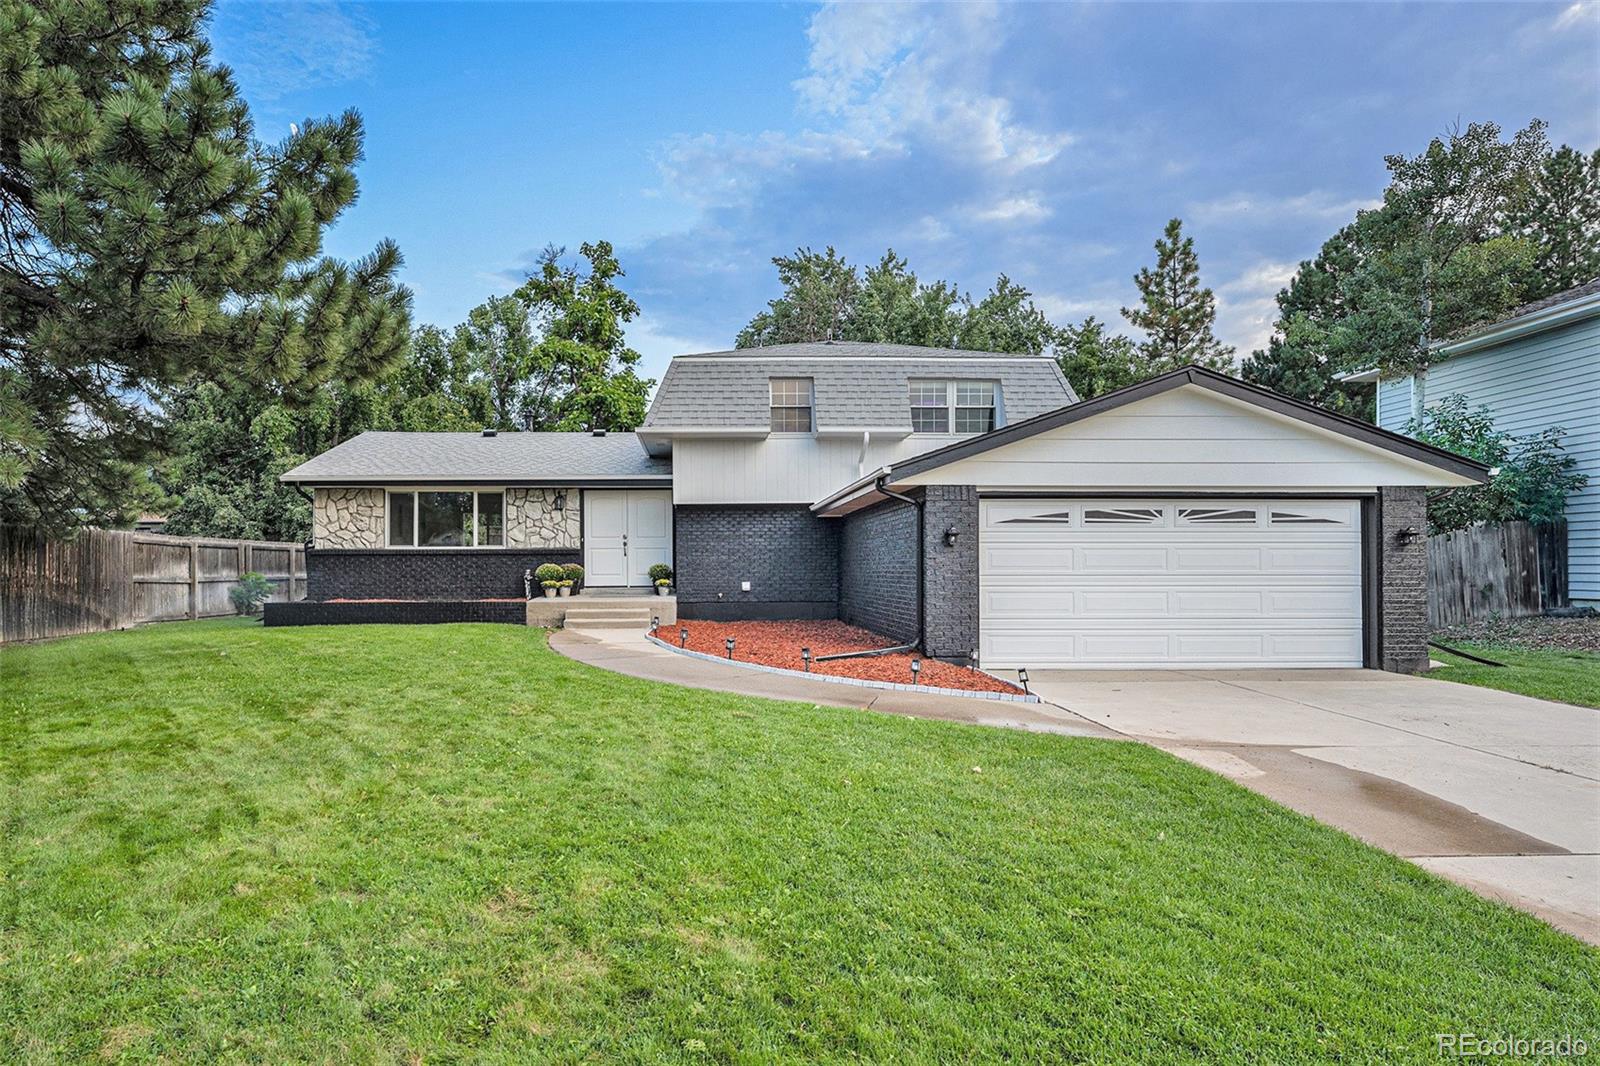 870  mesa court, Broomfield sold home. Closed on 2023-12-26 for $616,000.